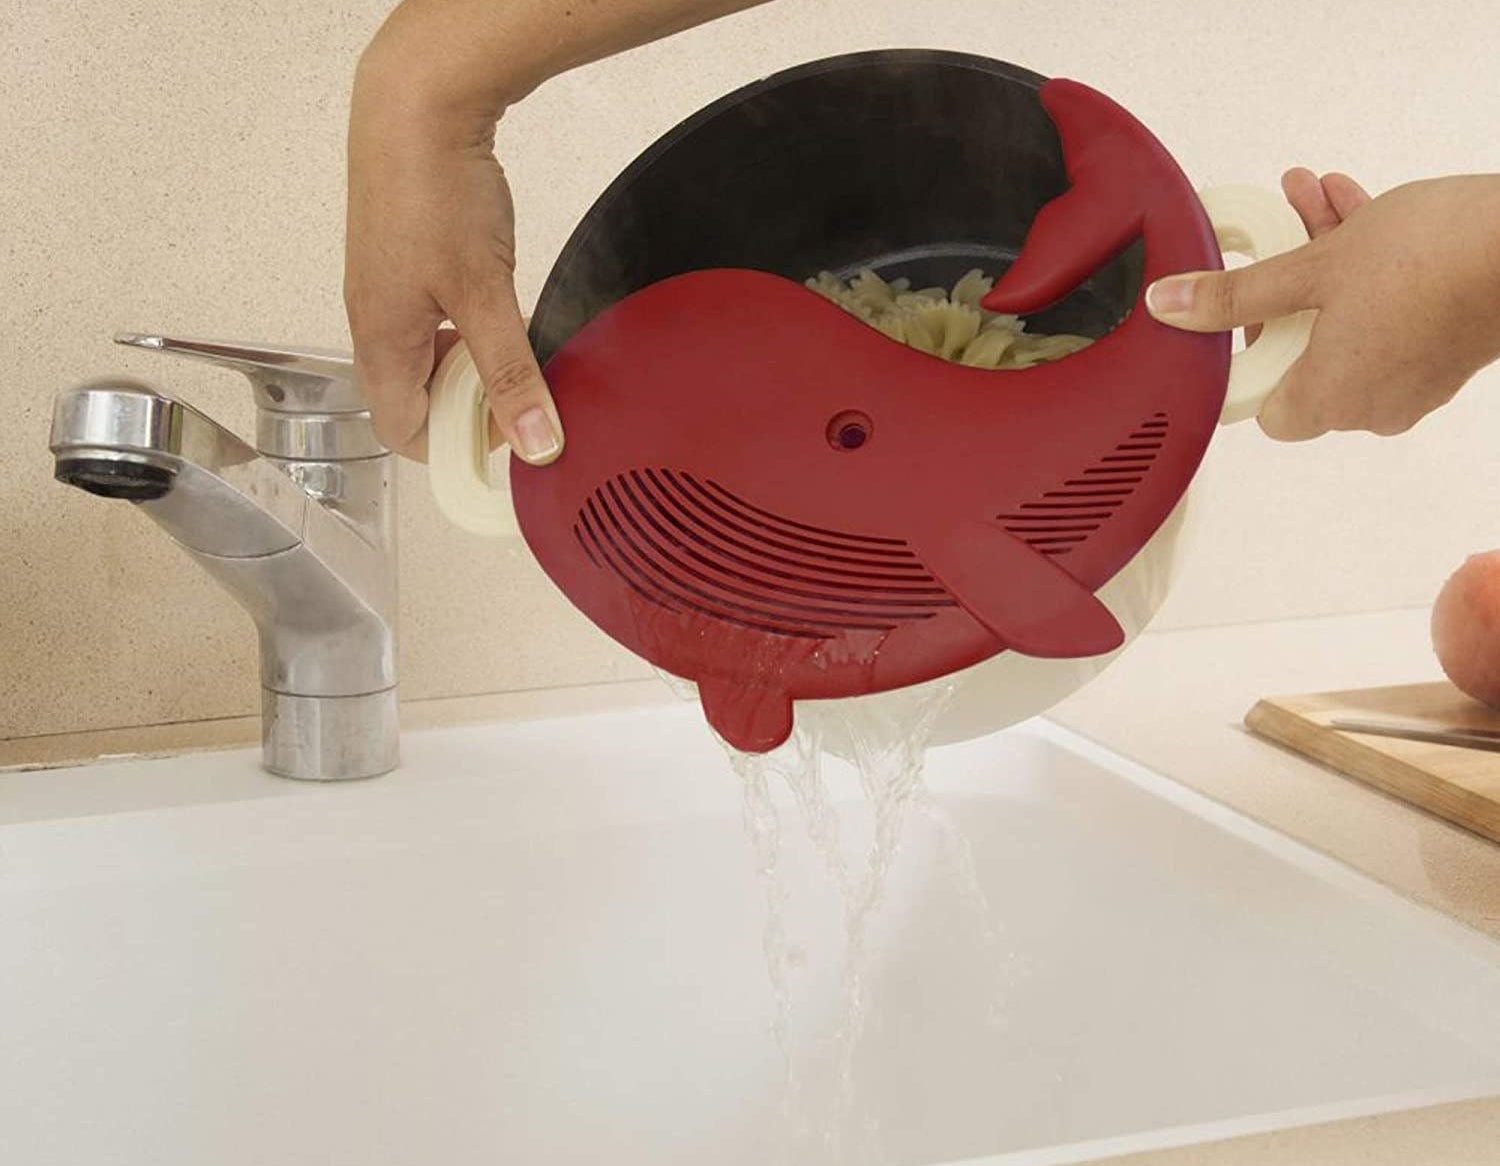 model holding a pot filled with pasta with a red whale-shaped strainer on top, getting the water out of the pot